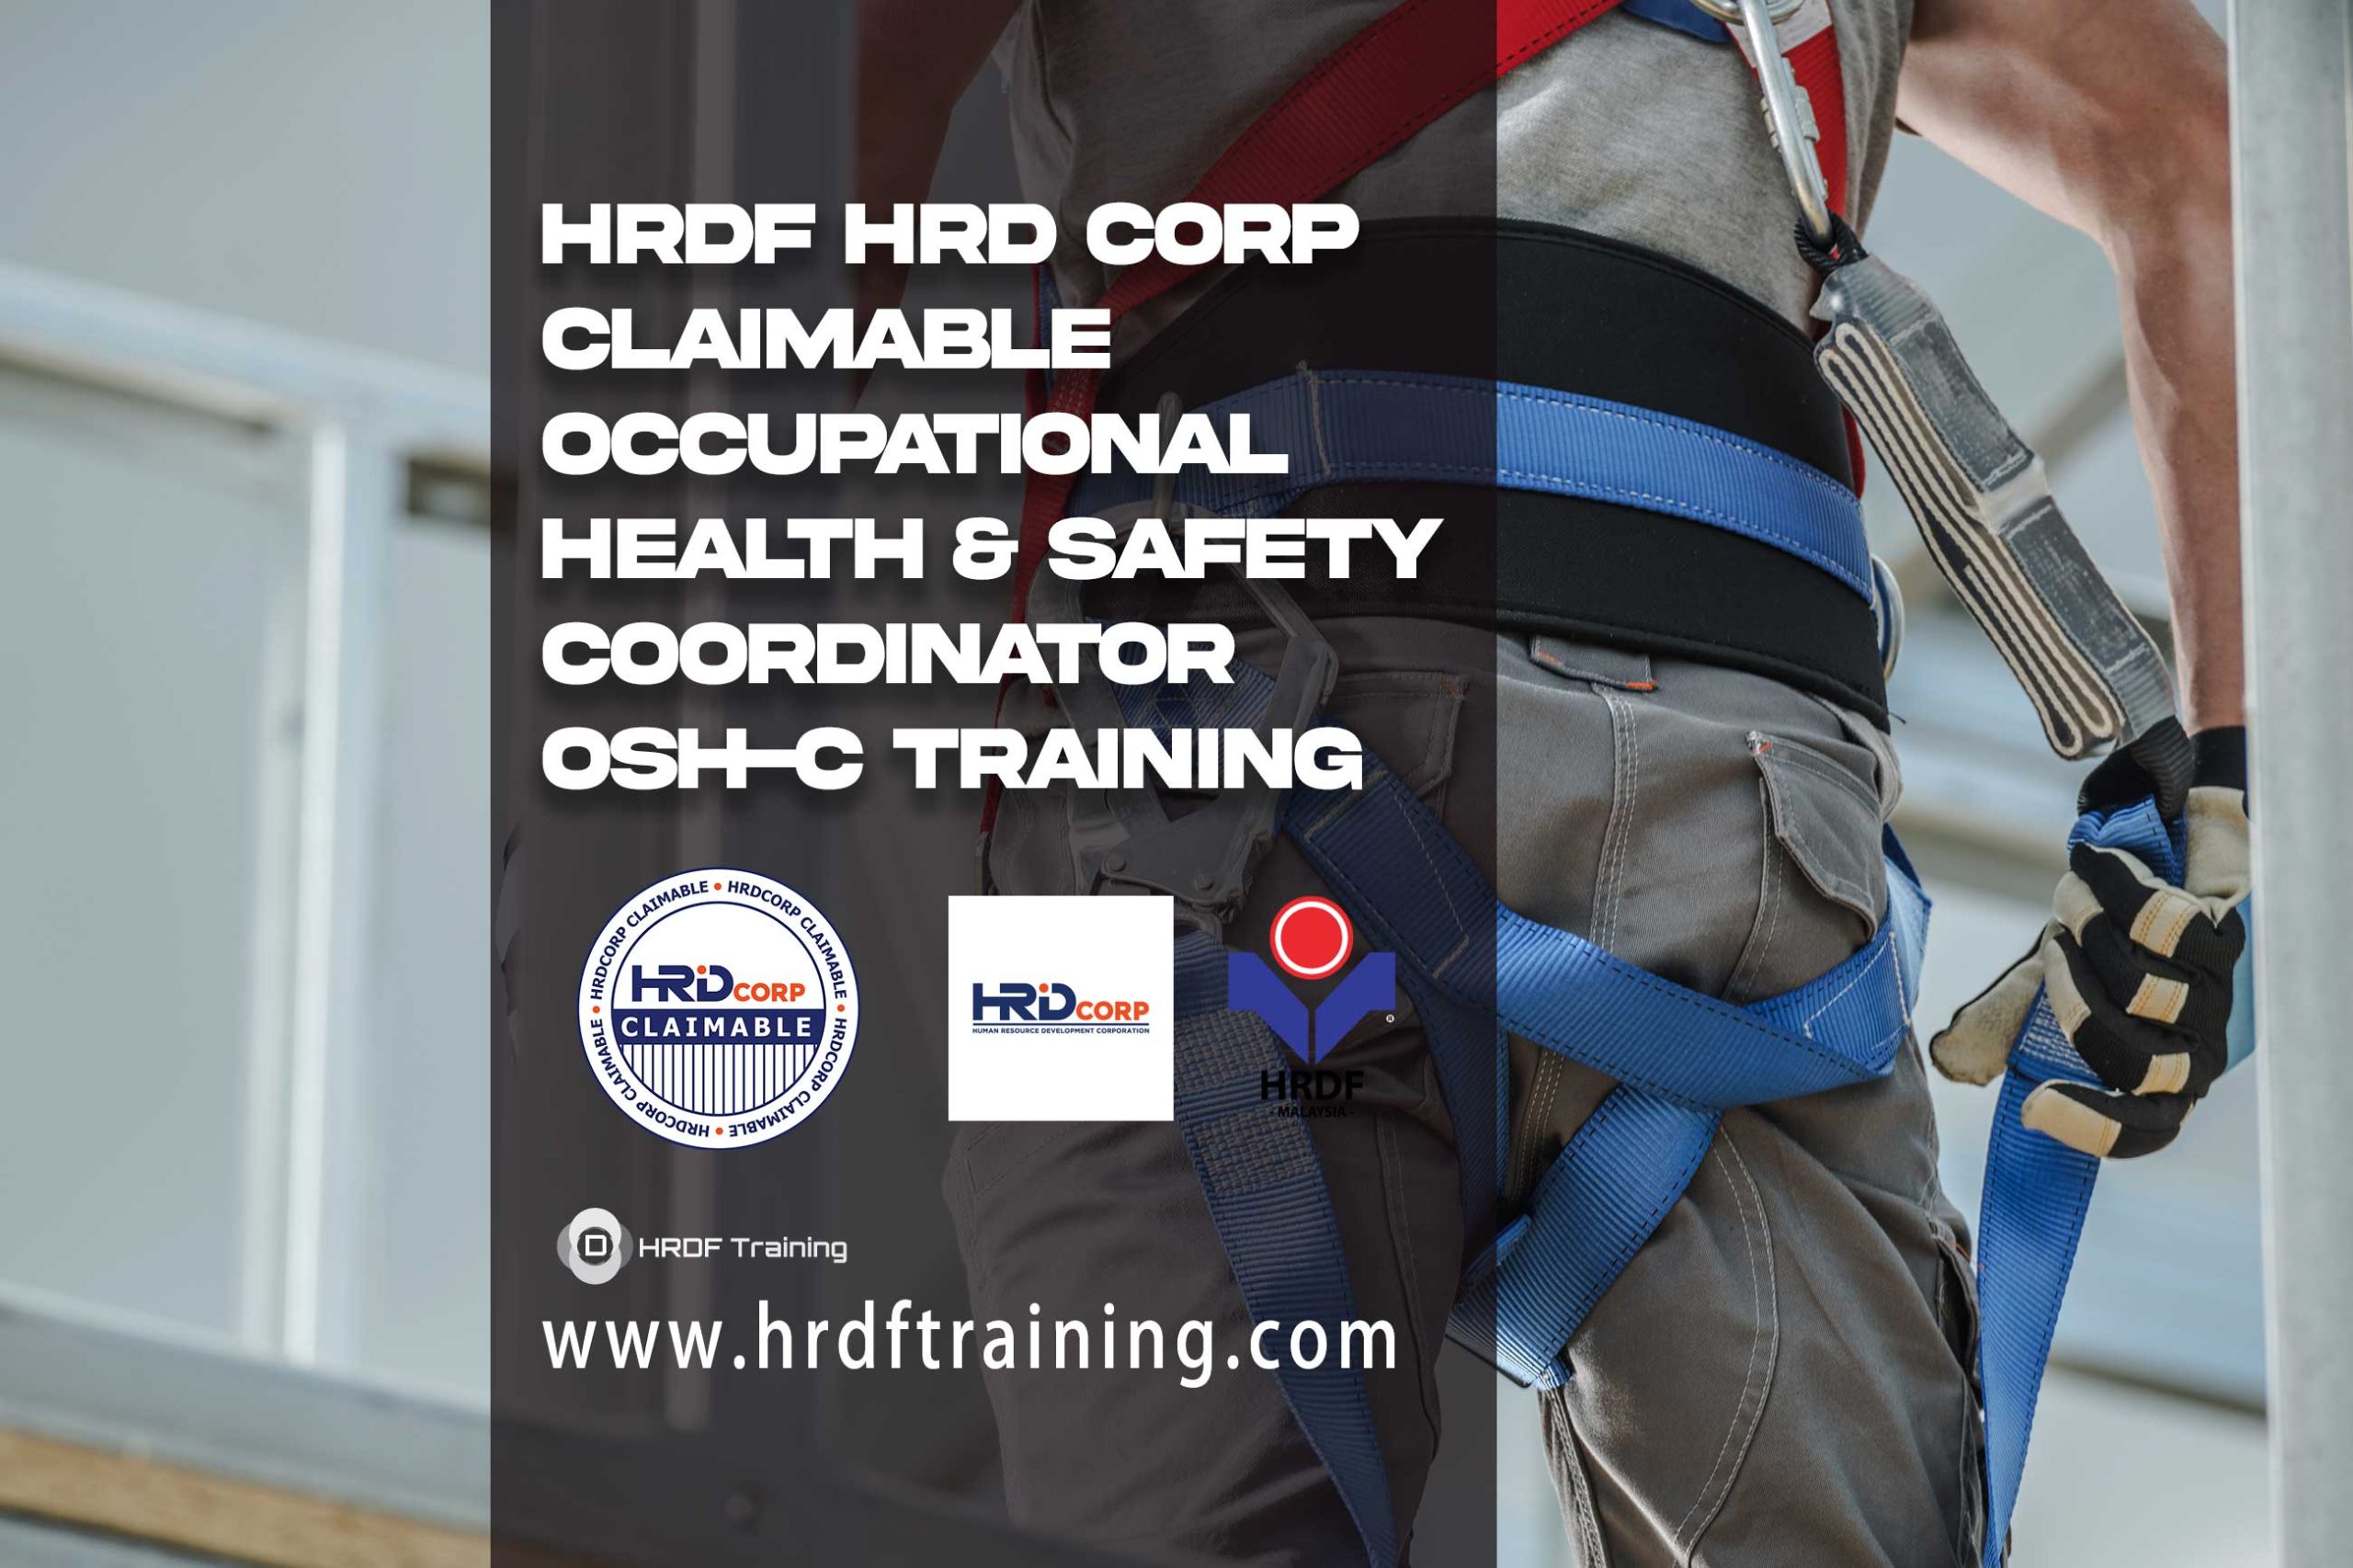 HRDF-HRD-Corp-Claimable-Occupational-Health-&-Safety-Coordinator-OSH-C-Training